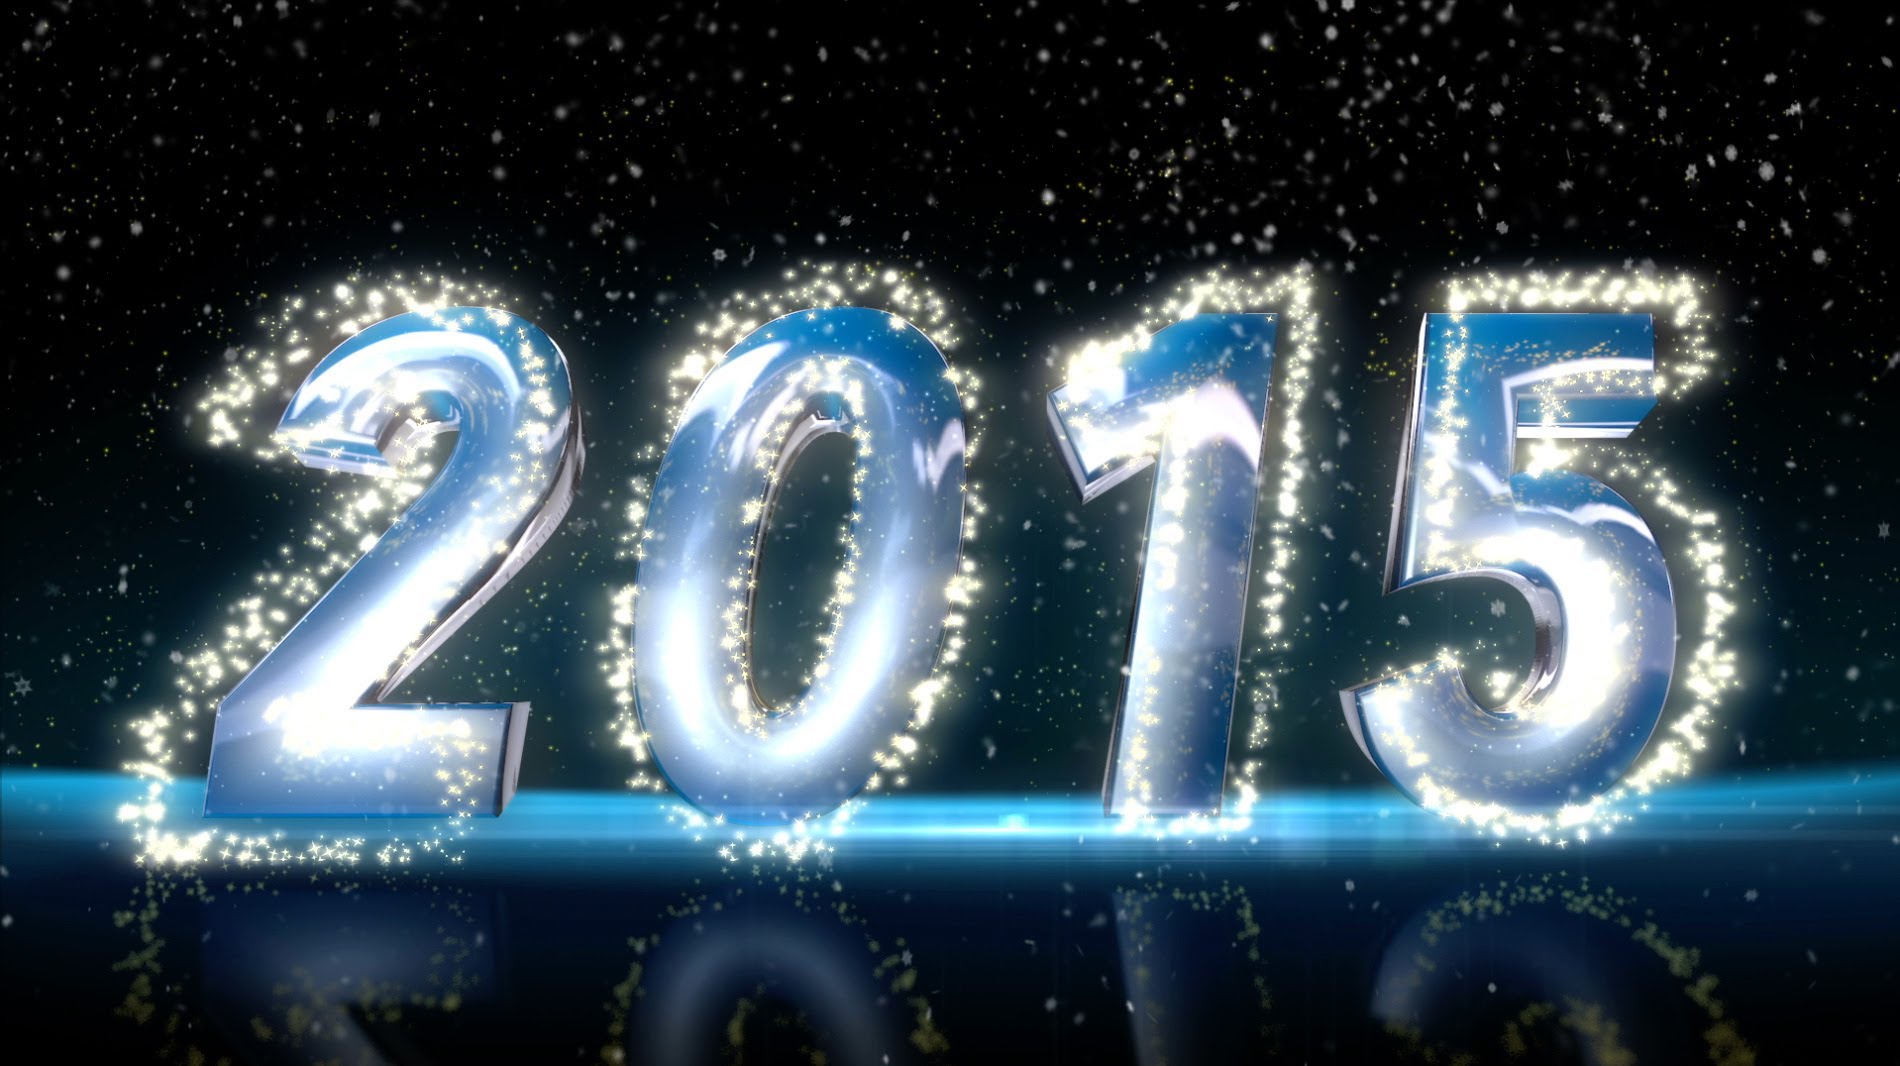 Happy New Year 2015 Picture Wallpaper Download - New Year 2015 - HD Wallpaper 